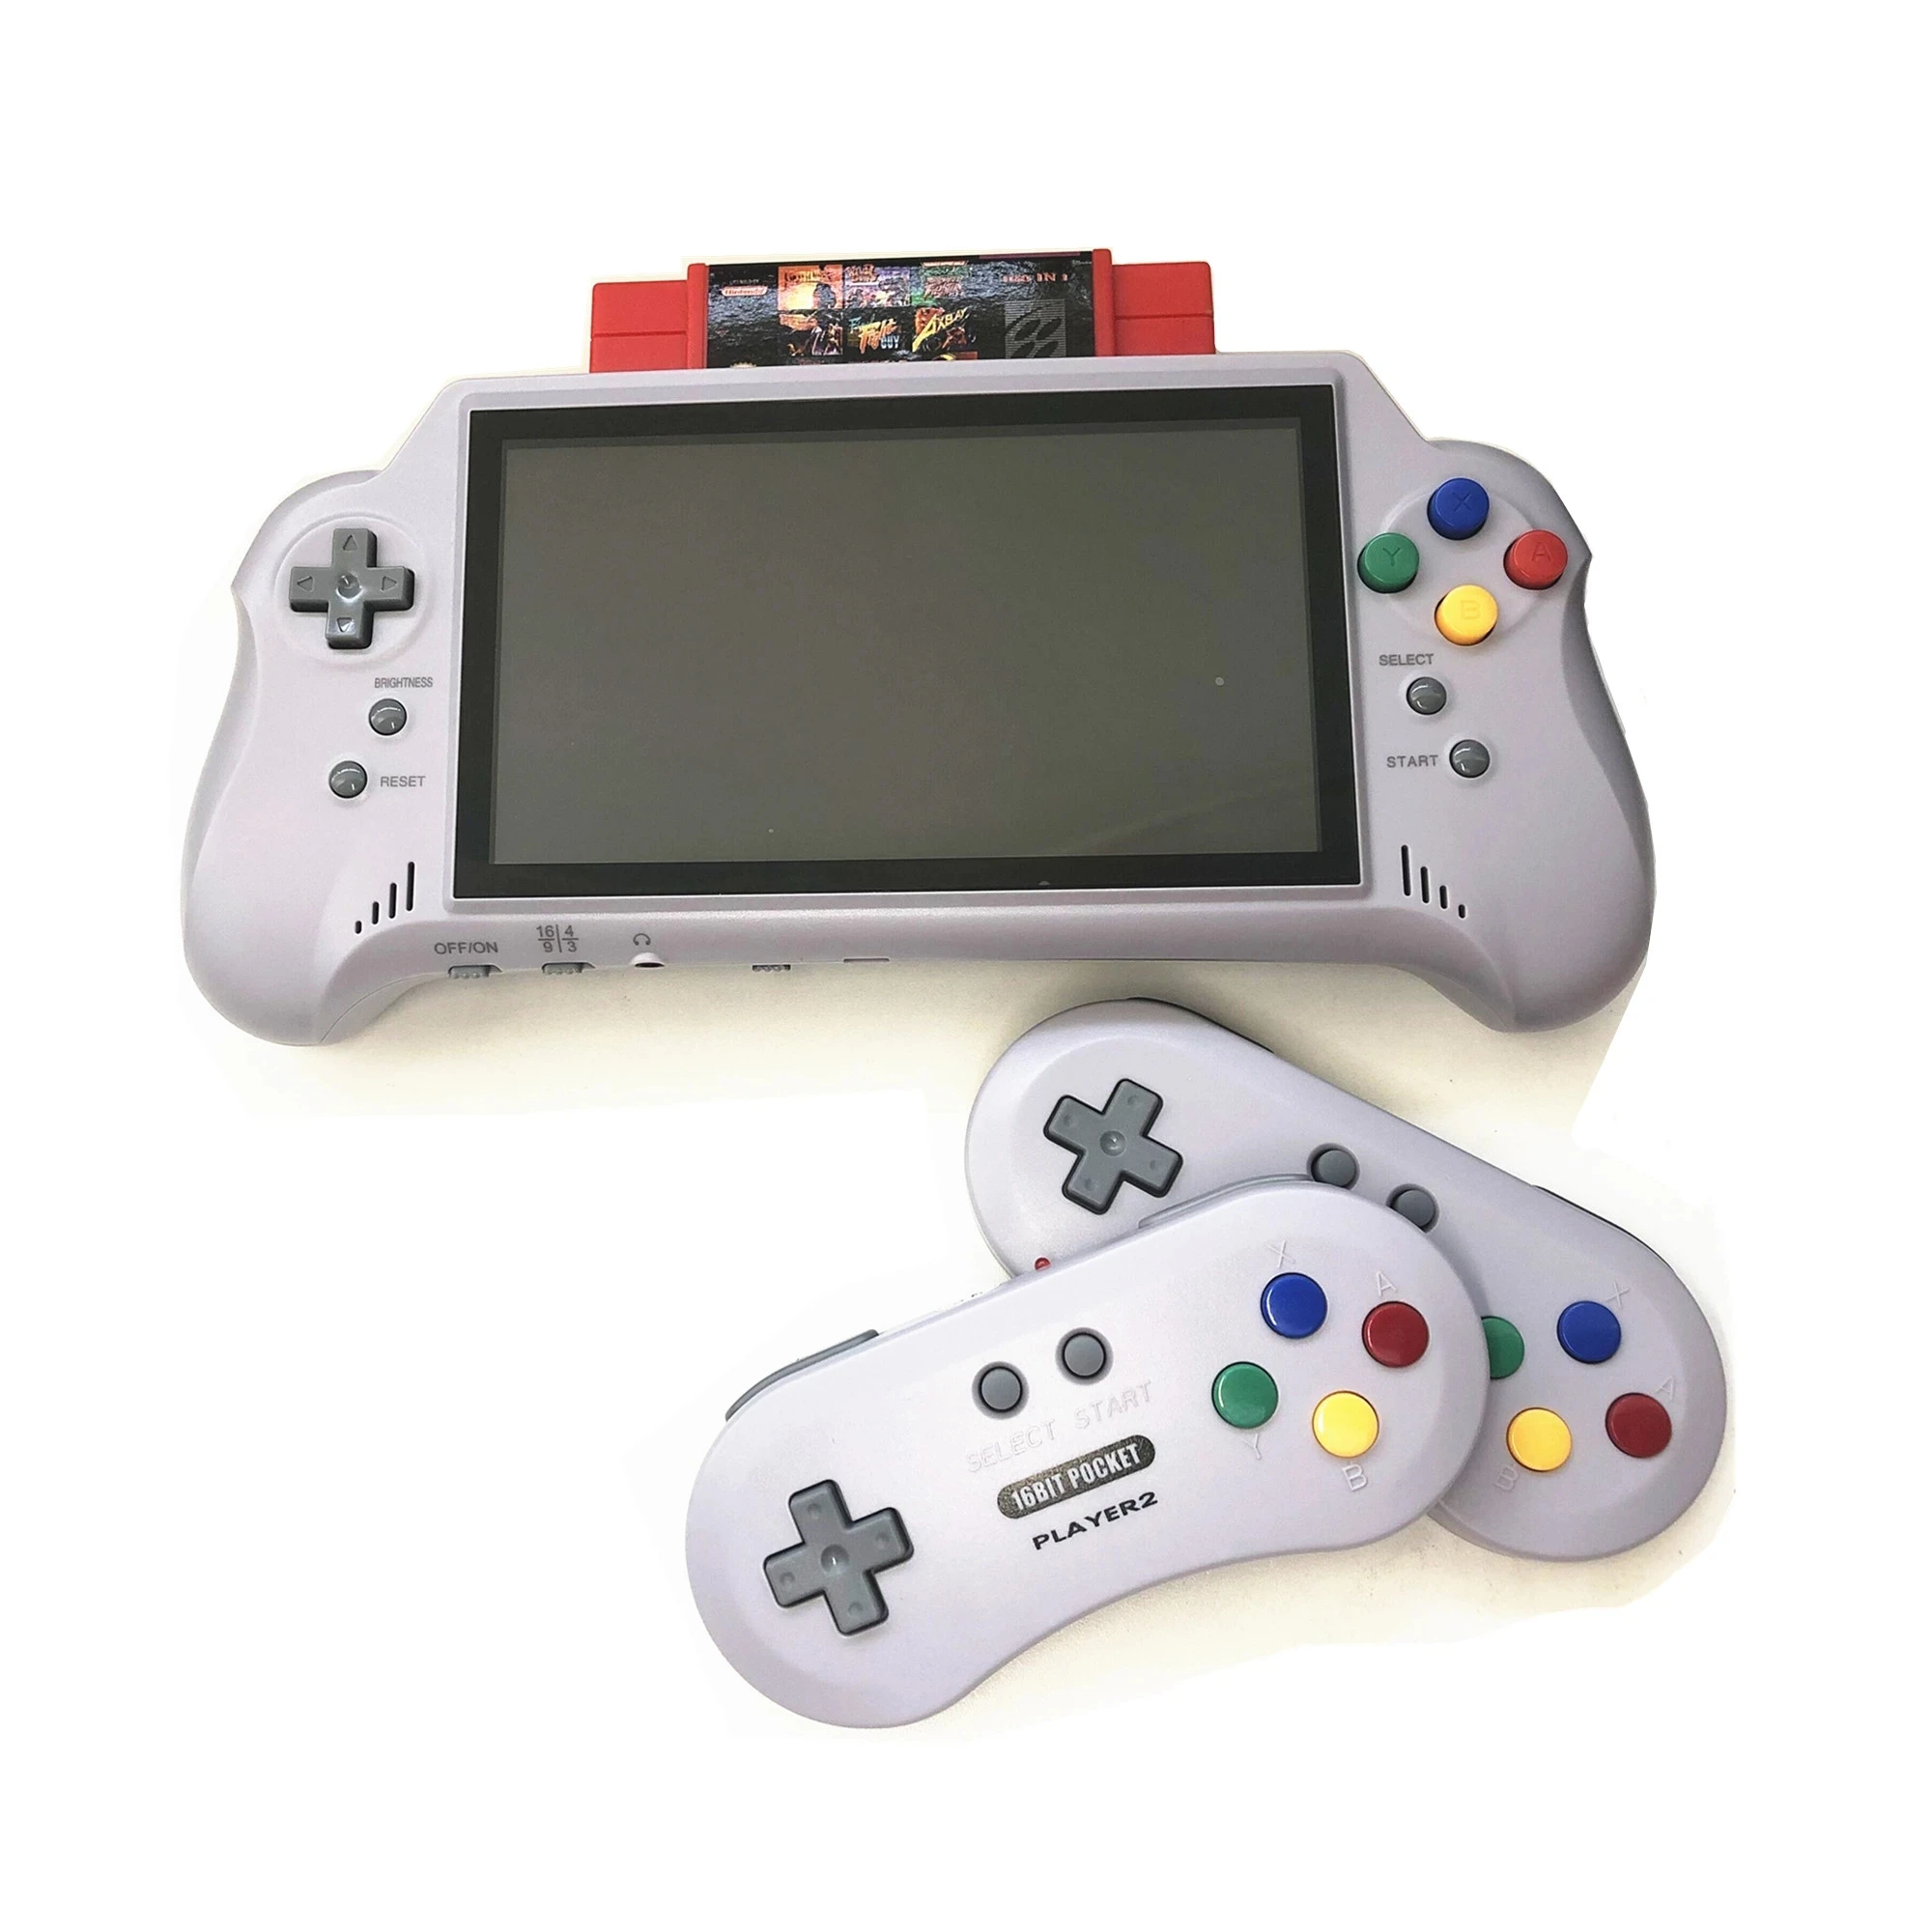 

2023 New HD 7 inch handheld game console 16BIT HDMI ULTRA SNES POCKET RETROAD 5PLUS 2.4G Wireless controllers